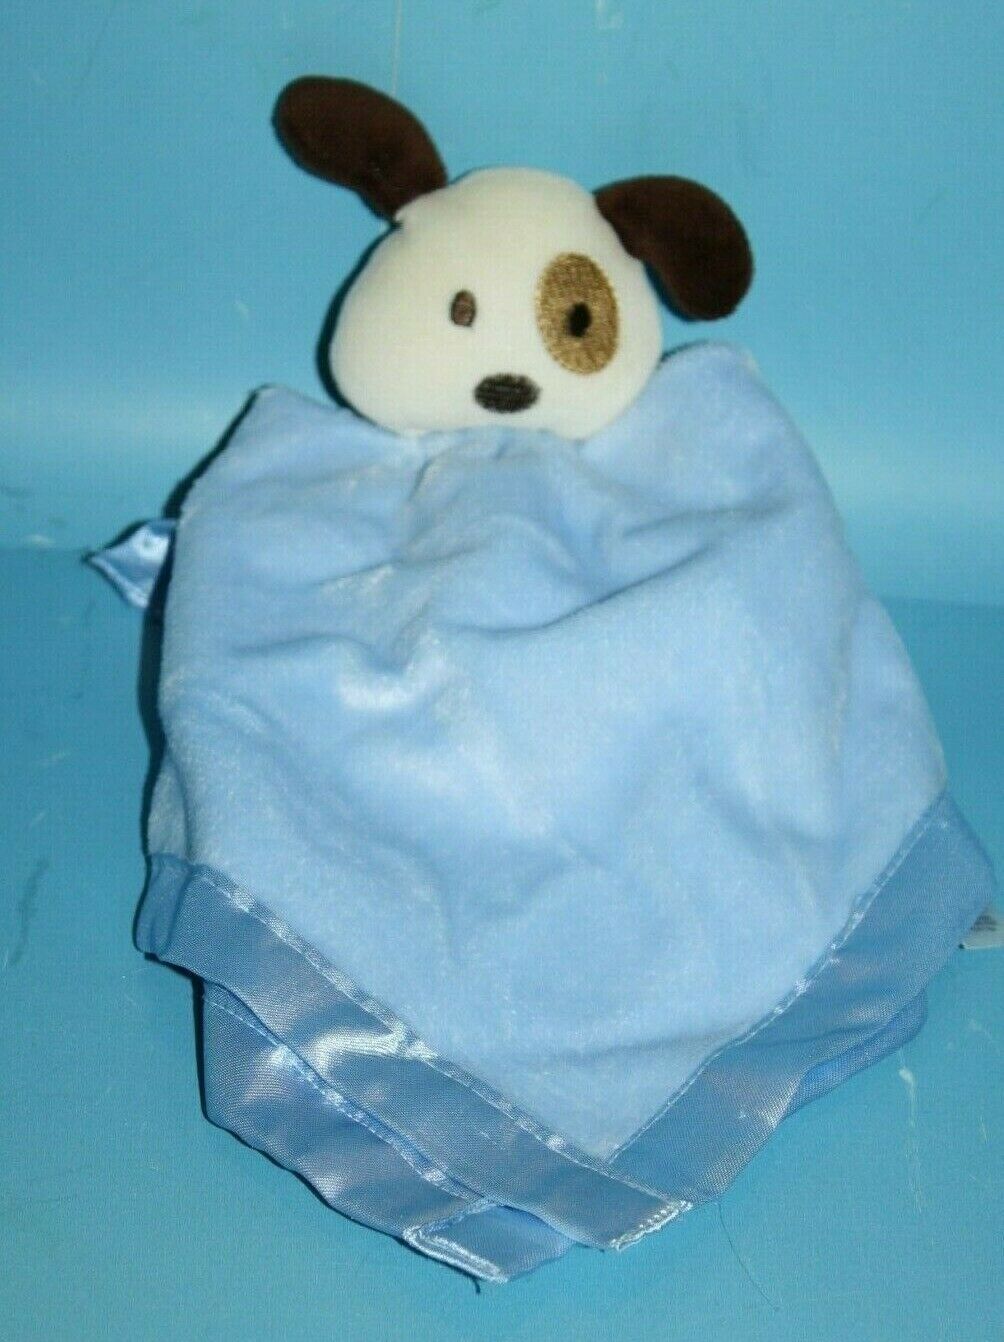 Baby Essentials Dog Rattle Eye Patch Security Blanket Plush Satin 2010 Lovey 14" - $27.09